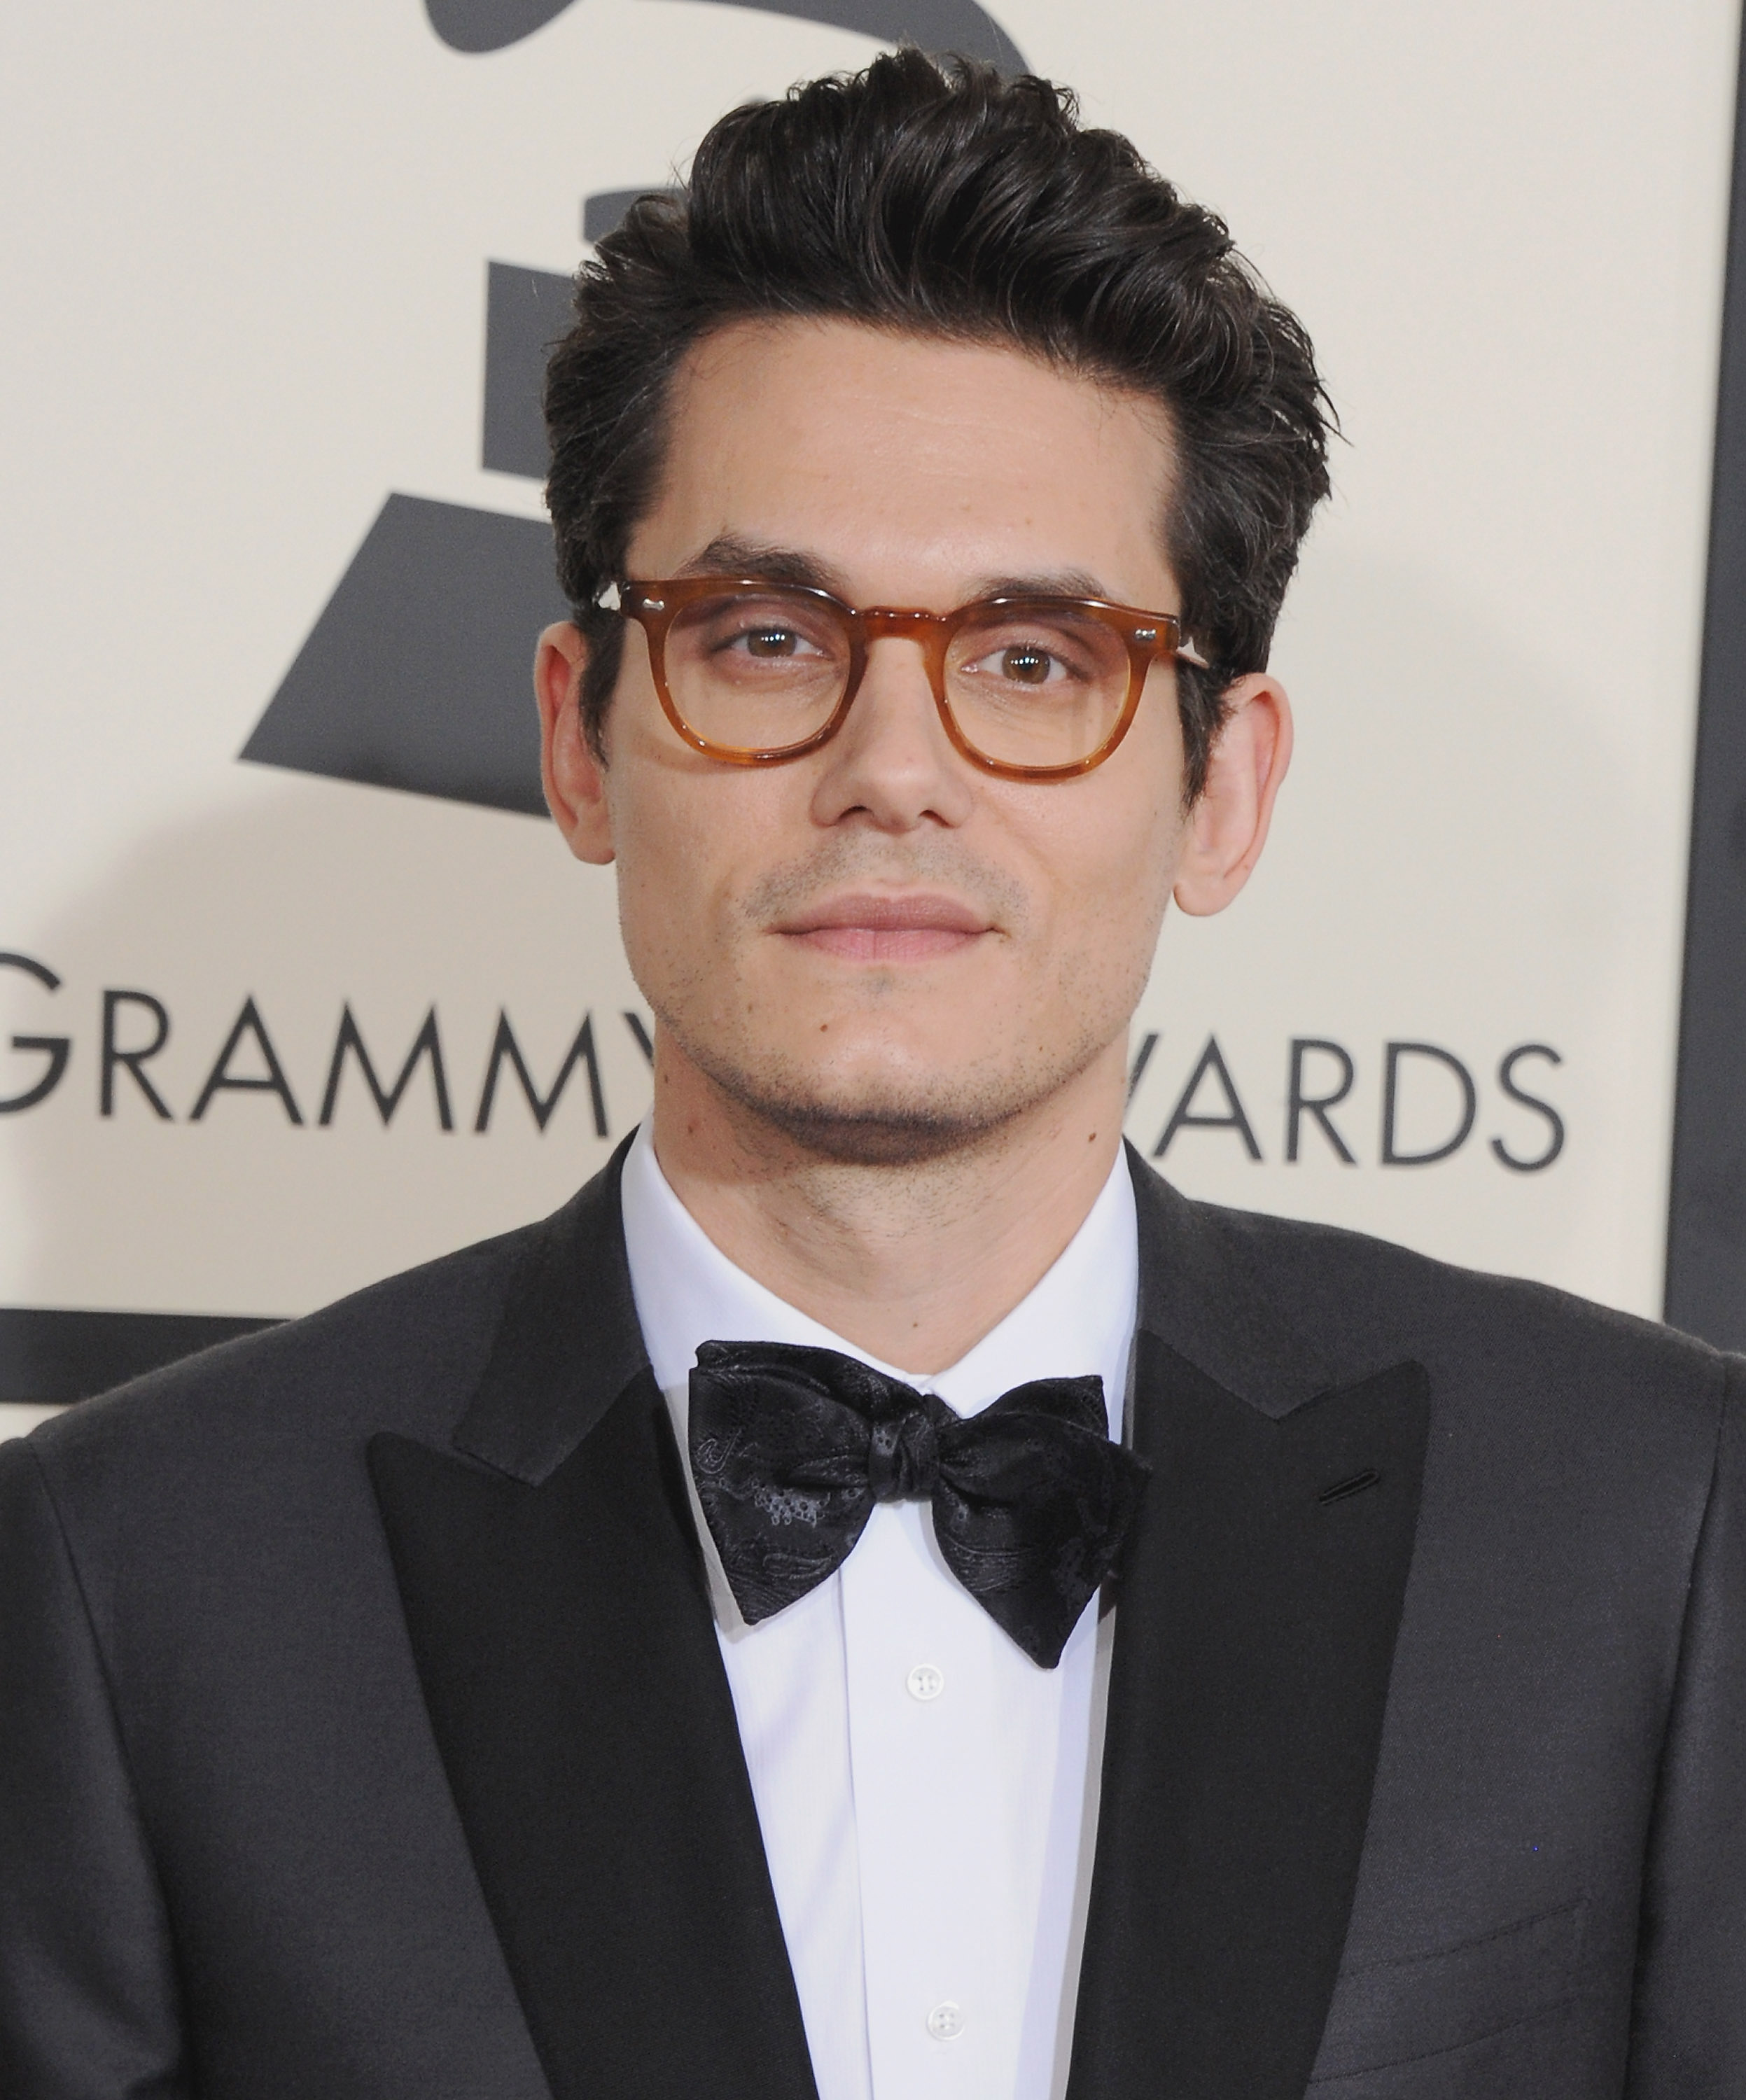 John Mayer, Eminem, and More Stars Who Have Admitted to Having a.